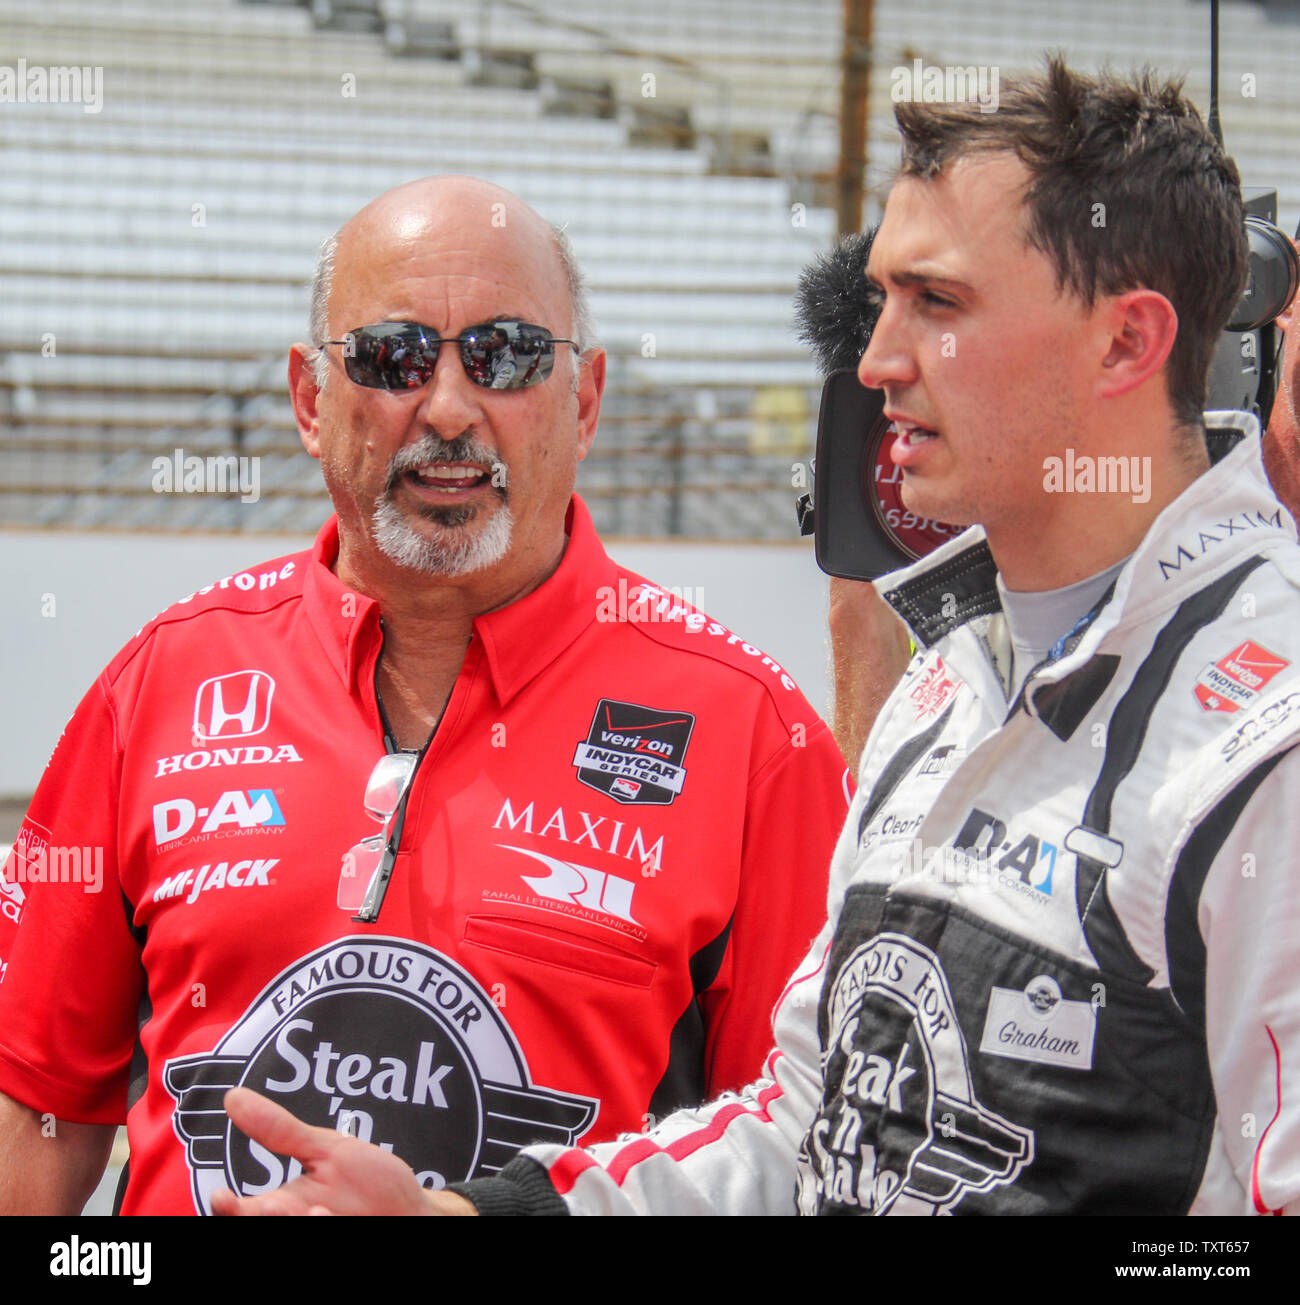 1986 Indy 500 winner Bobby Rahal and his son Graham Rahal discuss how Graham's run went on pole day qualifications for the 99th running of the Indianapolis 500 at the Indianapolis Motor Speedway on May 17, 2015 in Indianapolis, Indiana.  Rahal will start 17th on the grid.   Photo by Ed Locke/UPI Stock Photo